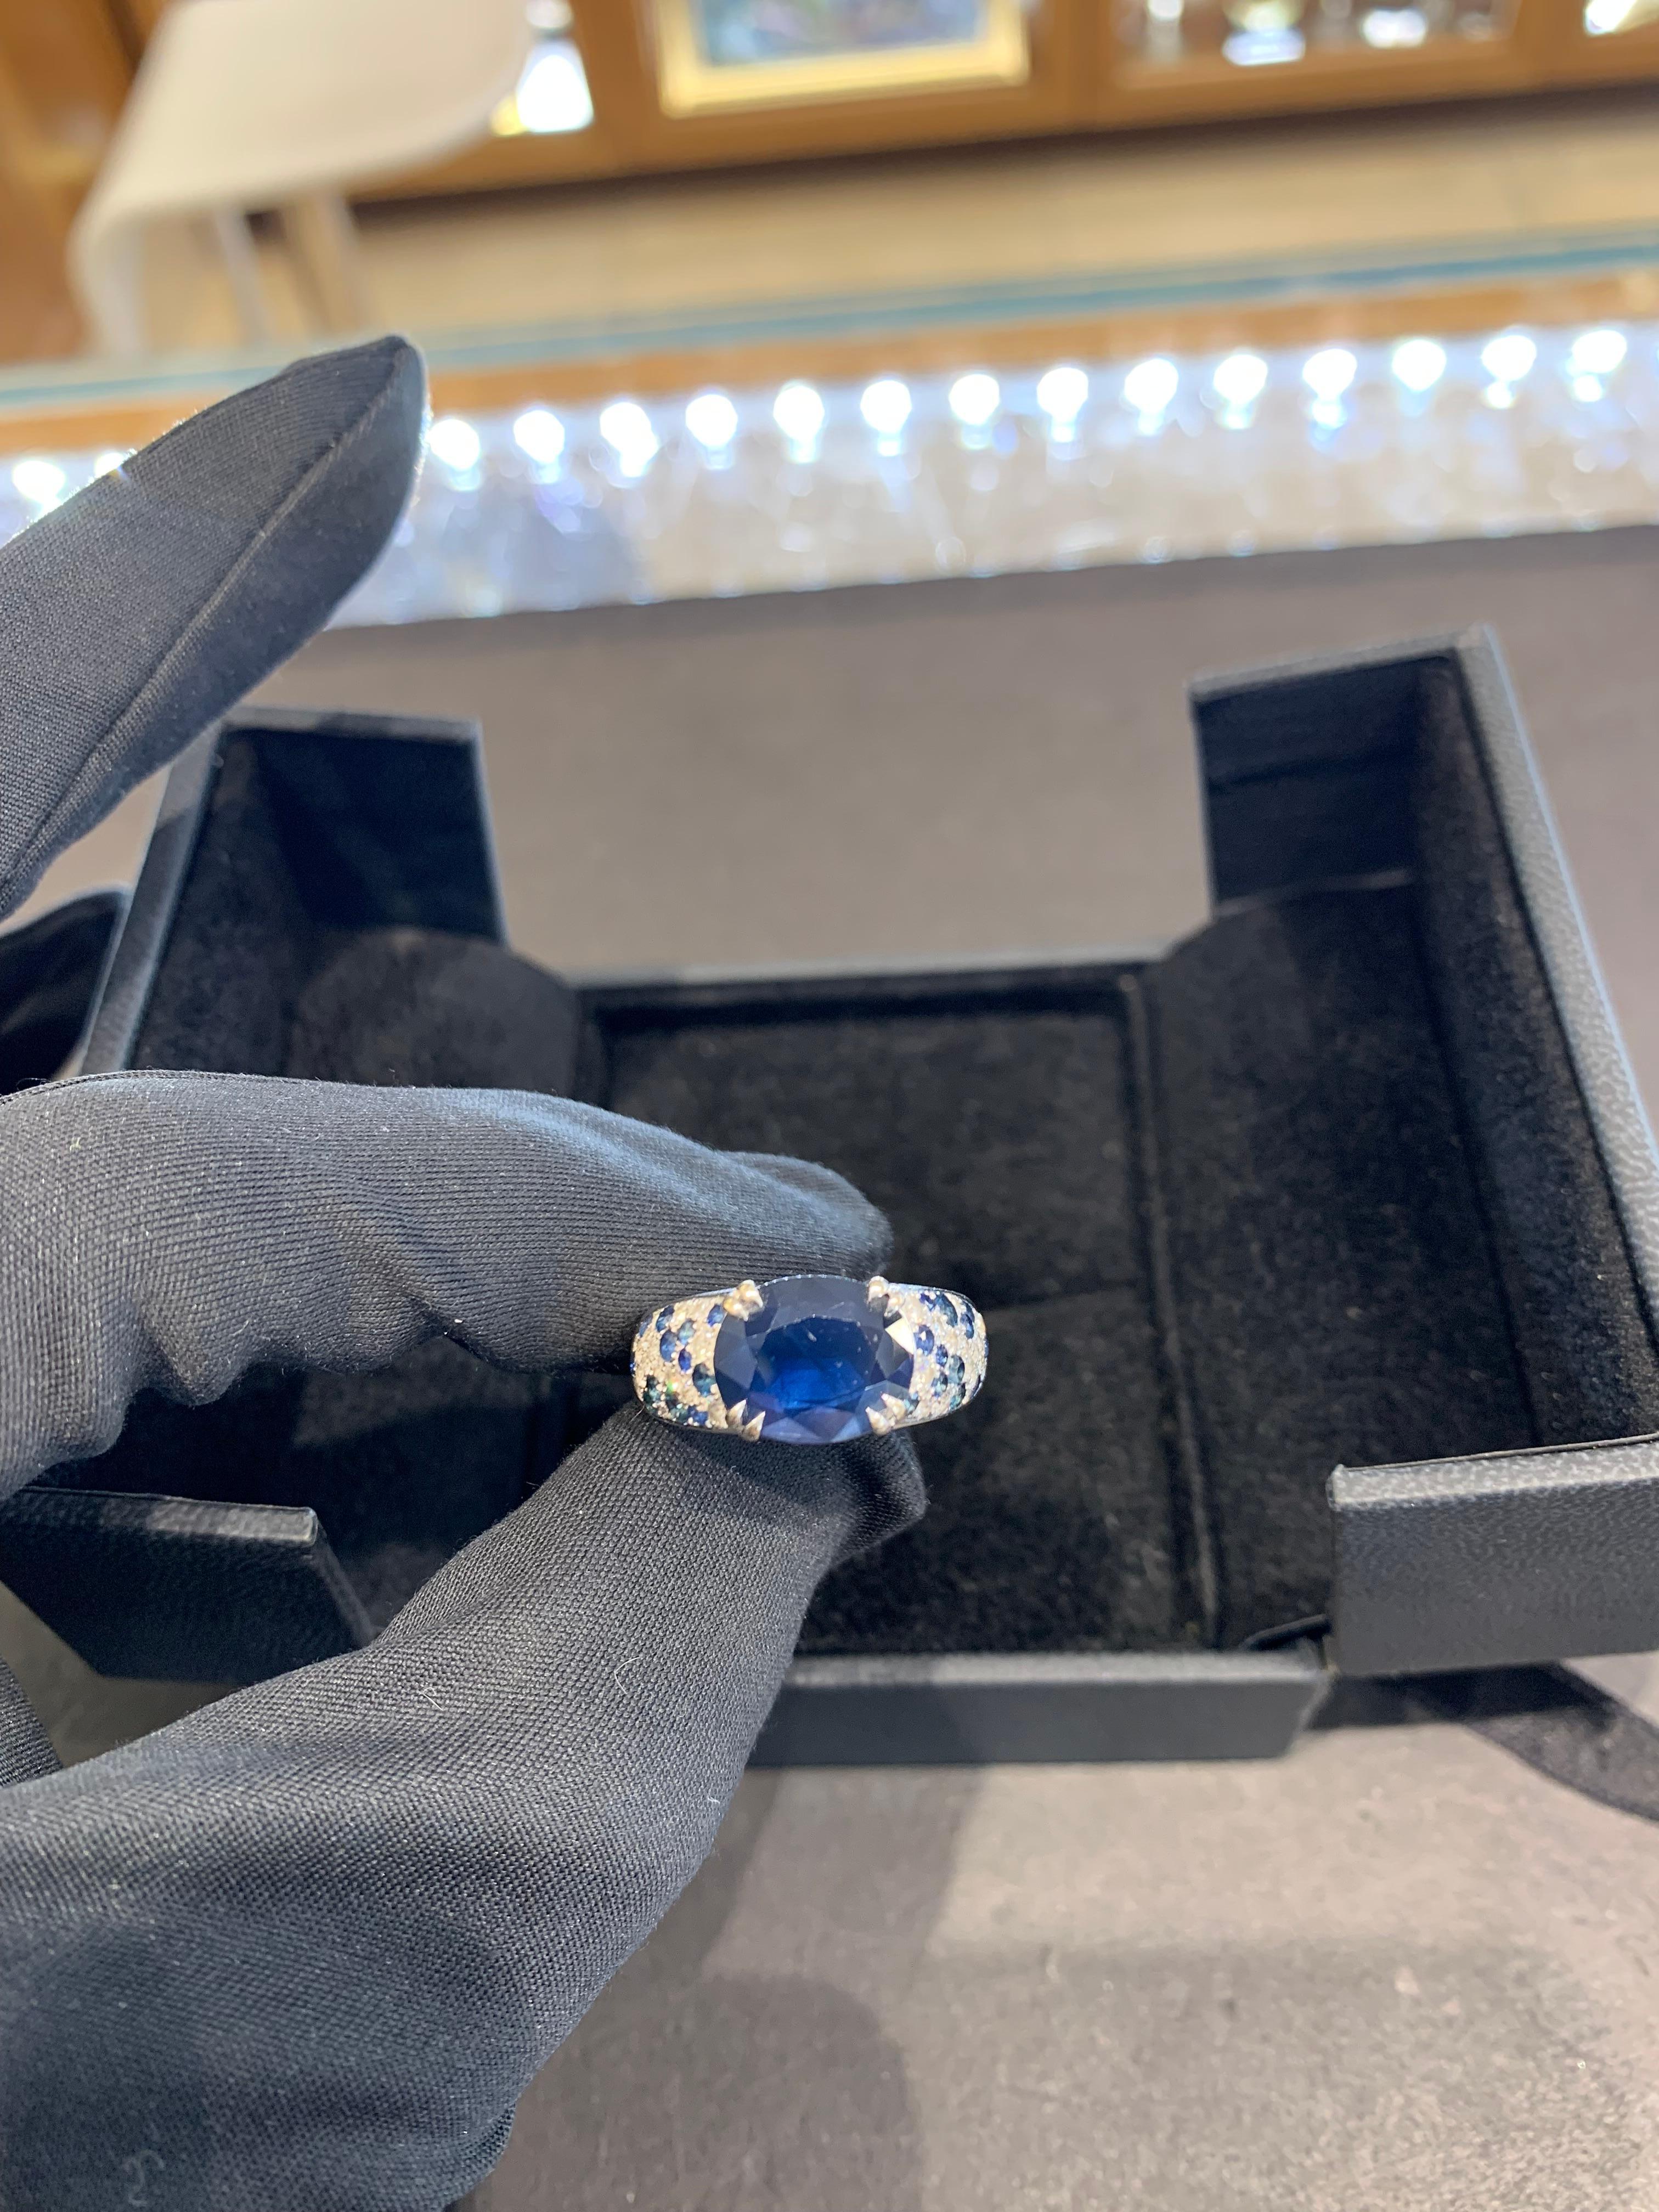 Beautifully Hand Crafted 18k White Gold Blue Sapphire & Diamond Ring Made & Signed By “Mauboussin”.
Amazing Shine, Incredible Craftsmanship.
Great Statement Piece.
Approximately 4.20 Carat Blue Sapphire.
Approximately 1.0 Carats Of